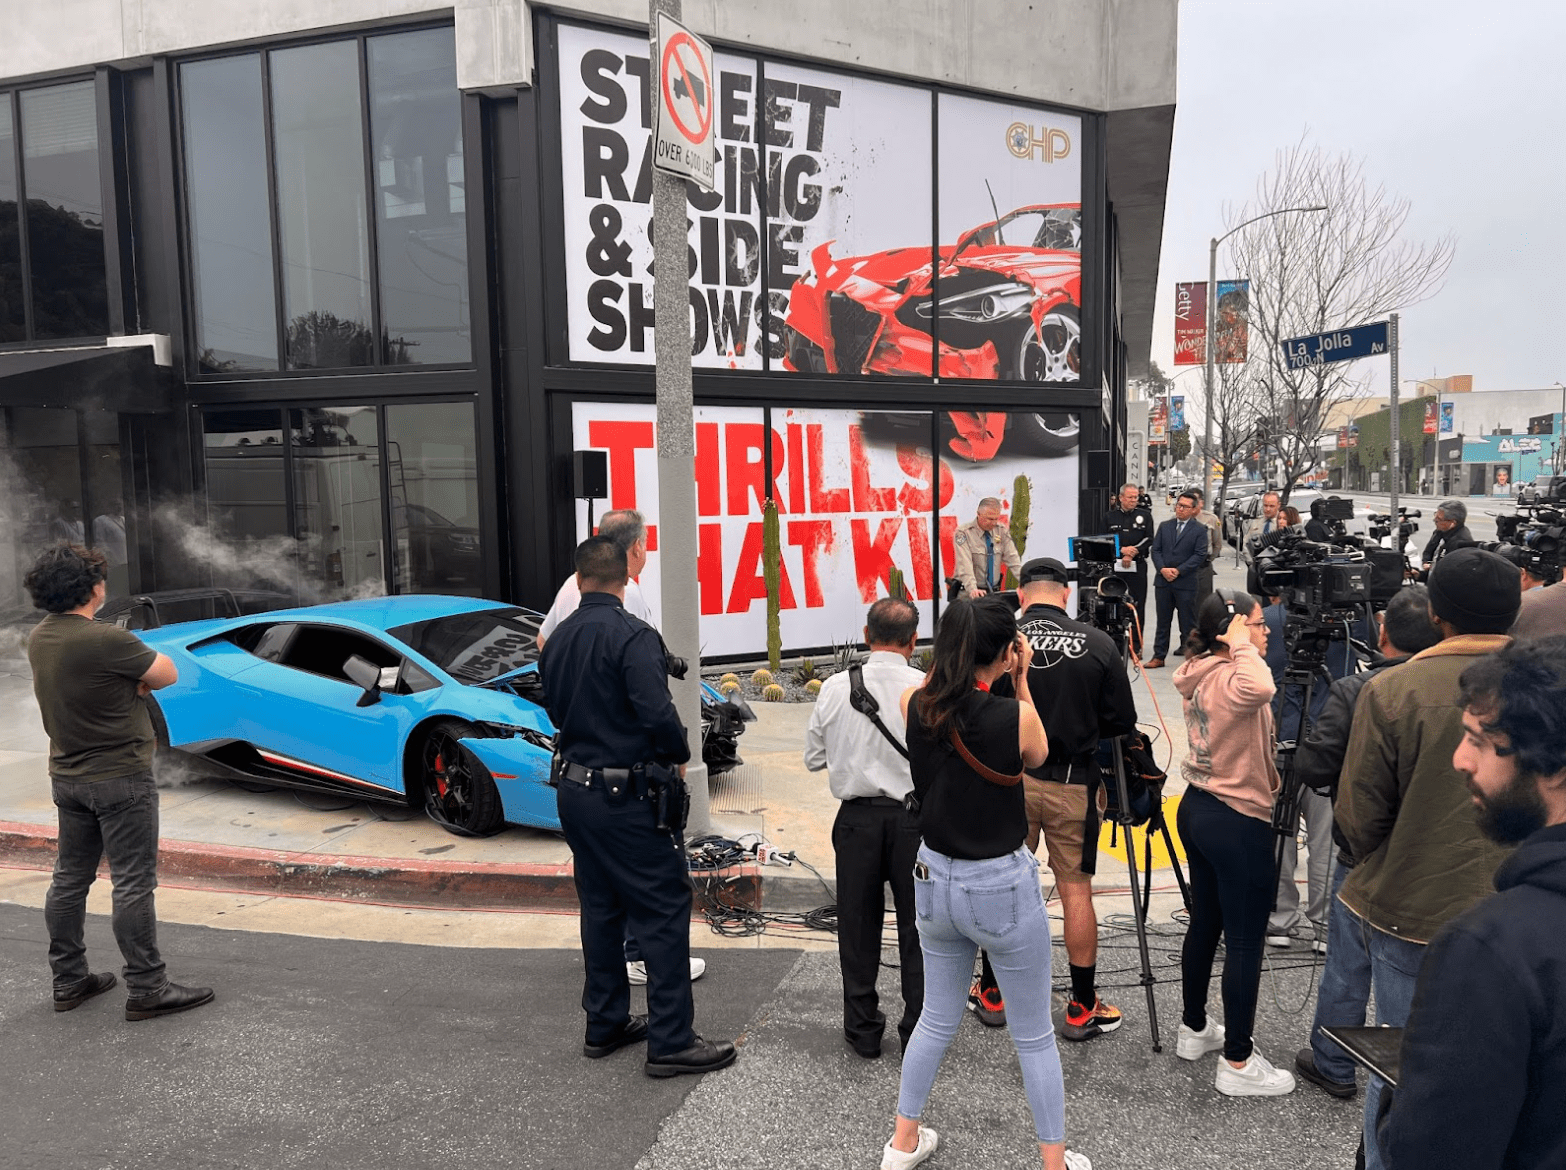 JP Marketing's Video Coordinator Alex Carrillo taking photos of "Thrills That Kill" Campaign for California Highway Patrol